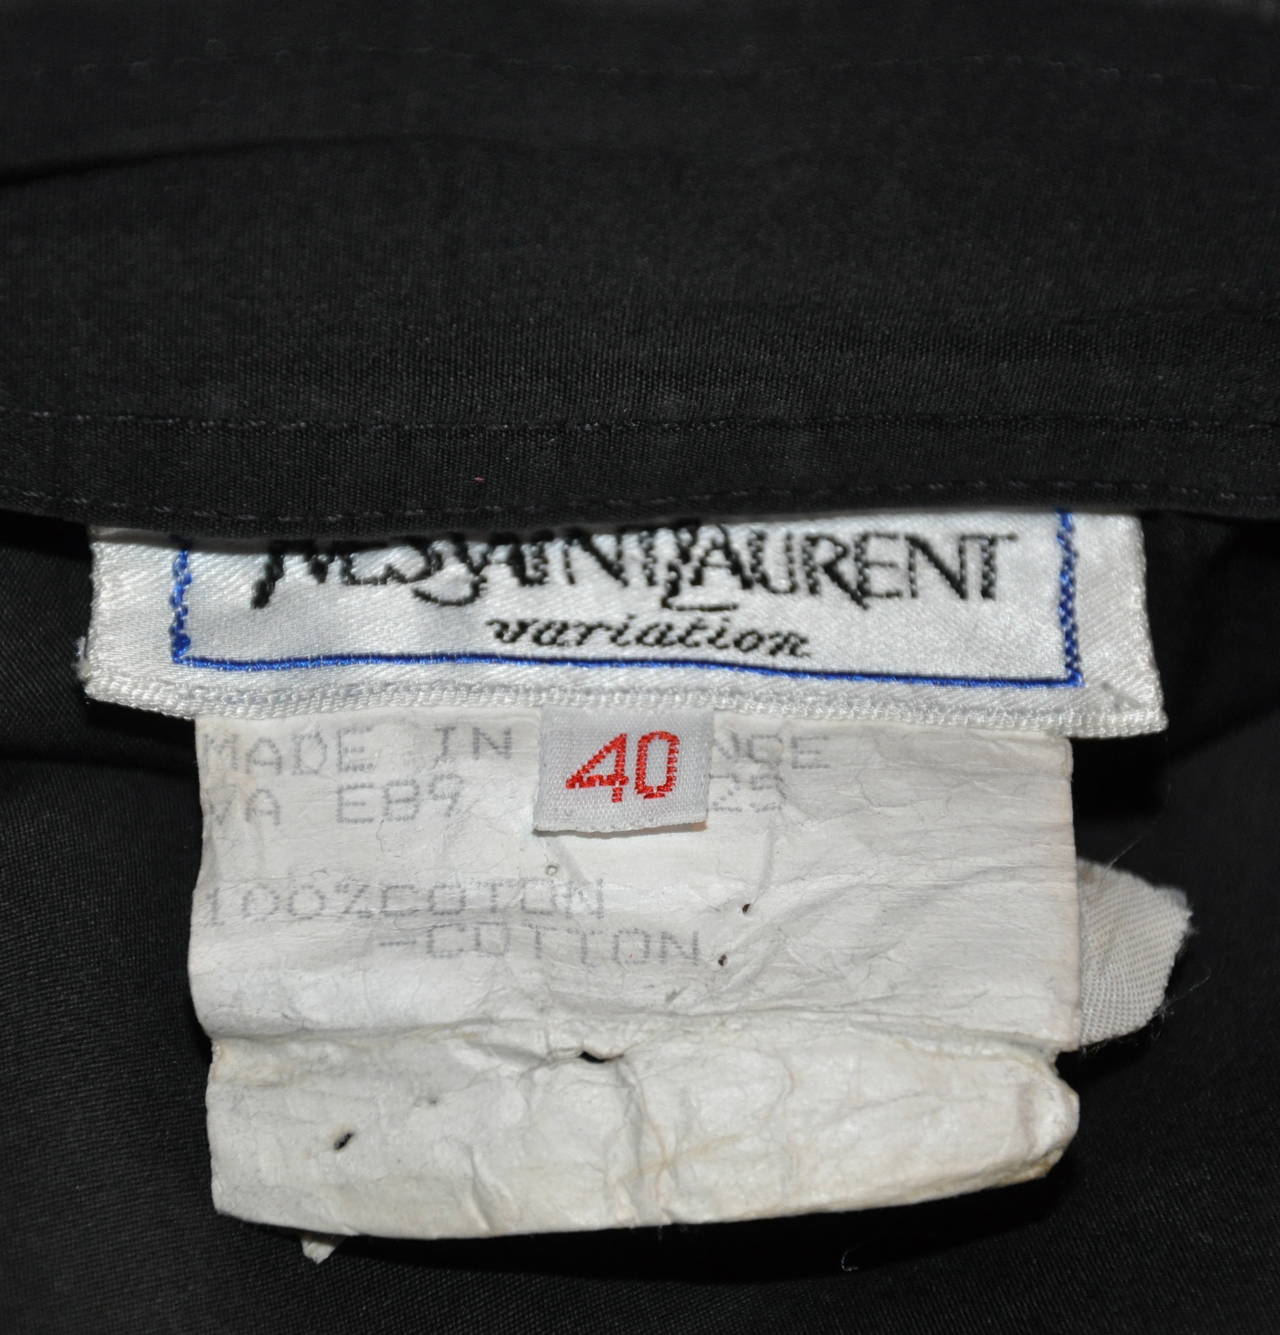 Yves Saint Laurent black cotton skirt is accented with his signature engraved 